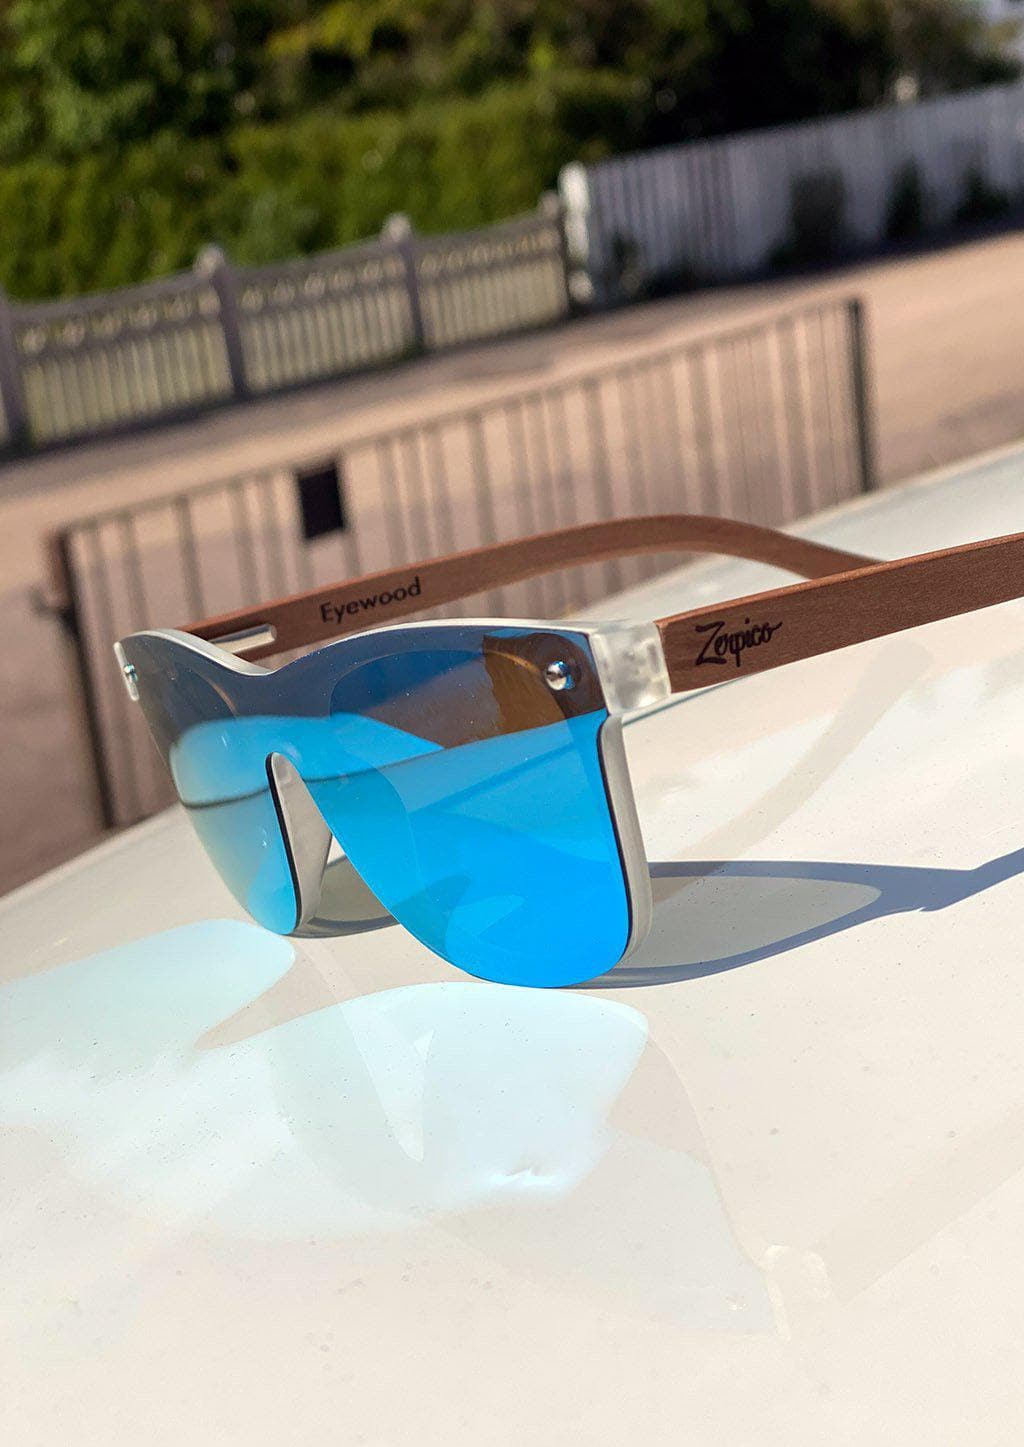 Eyewood tomorrow is our modern cool take on classic models. This is Gemeni with blue mirror lenses. Nice wooden sunglasses. Details from the side outside in the sun.